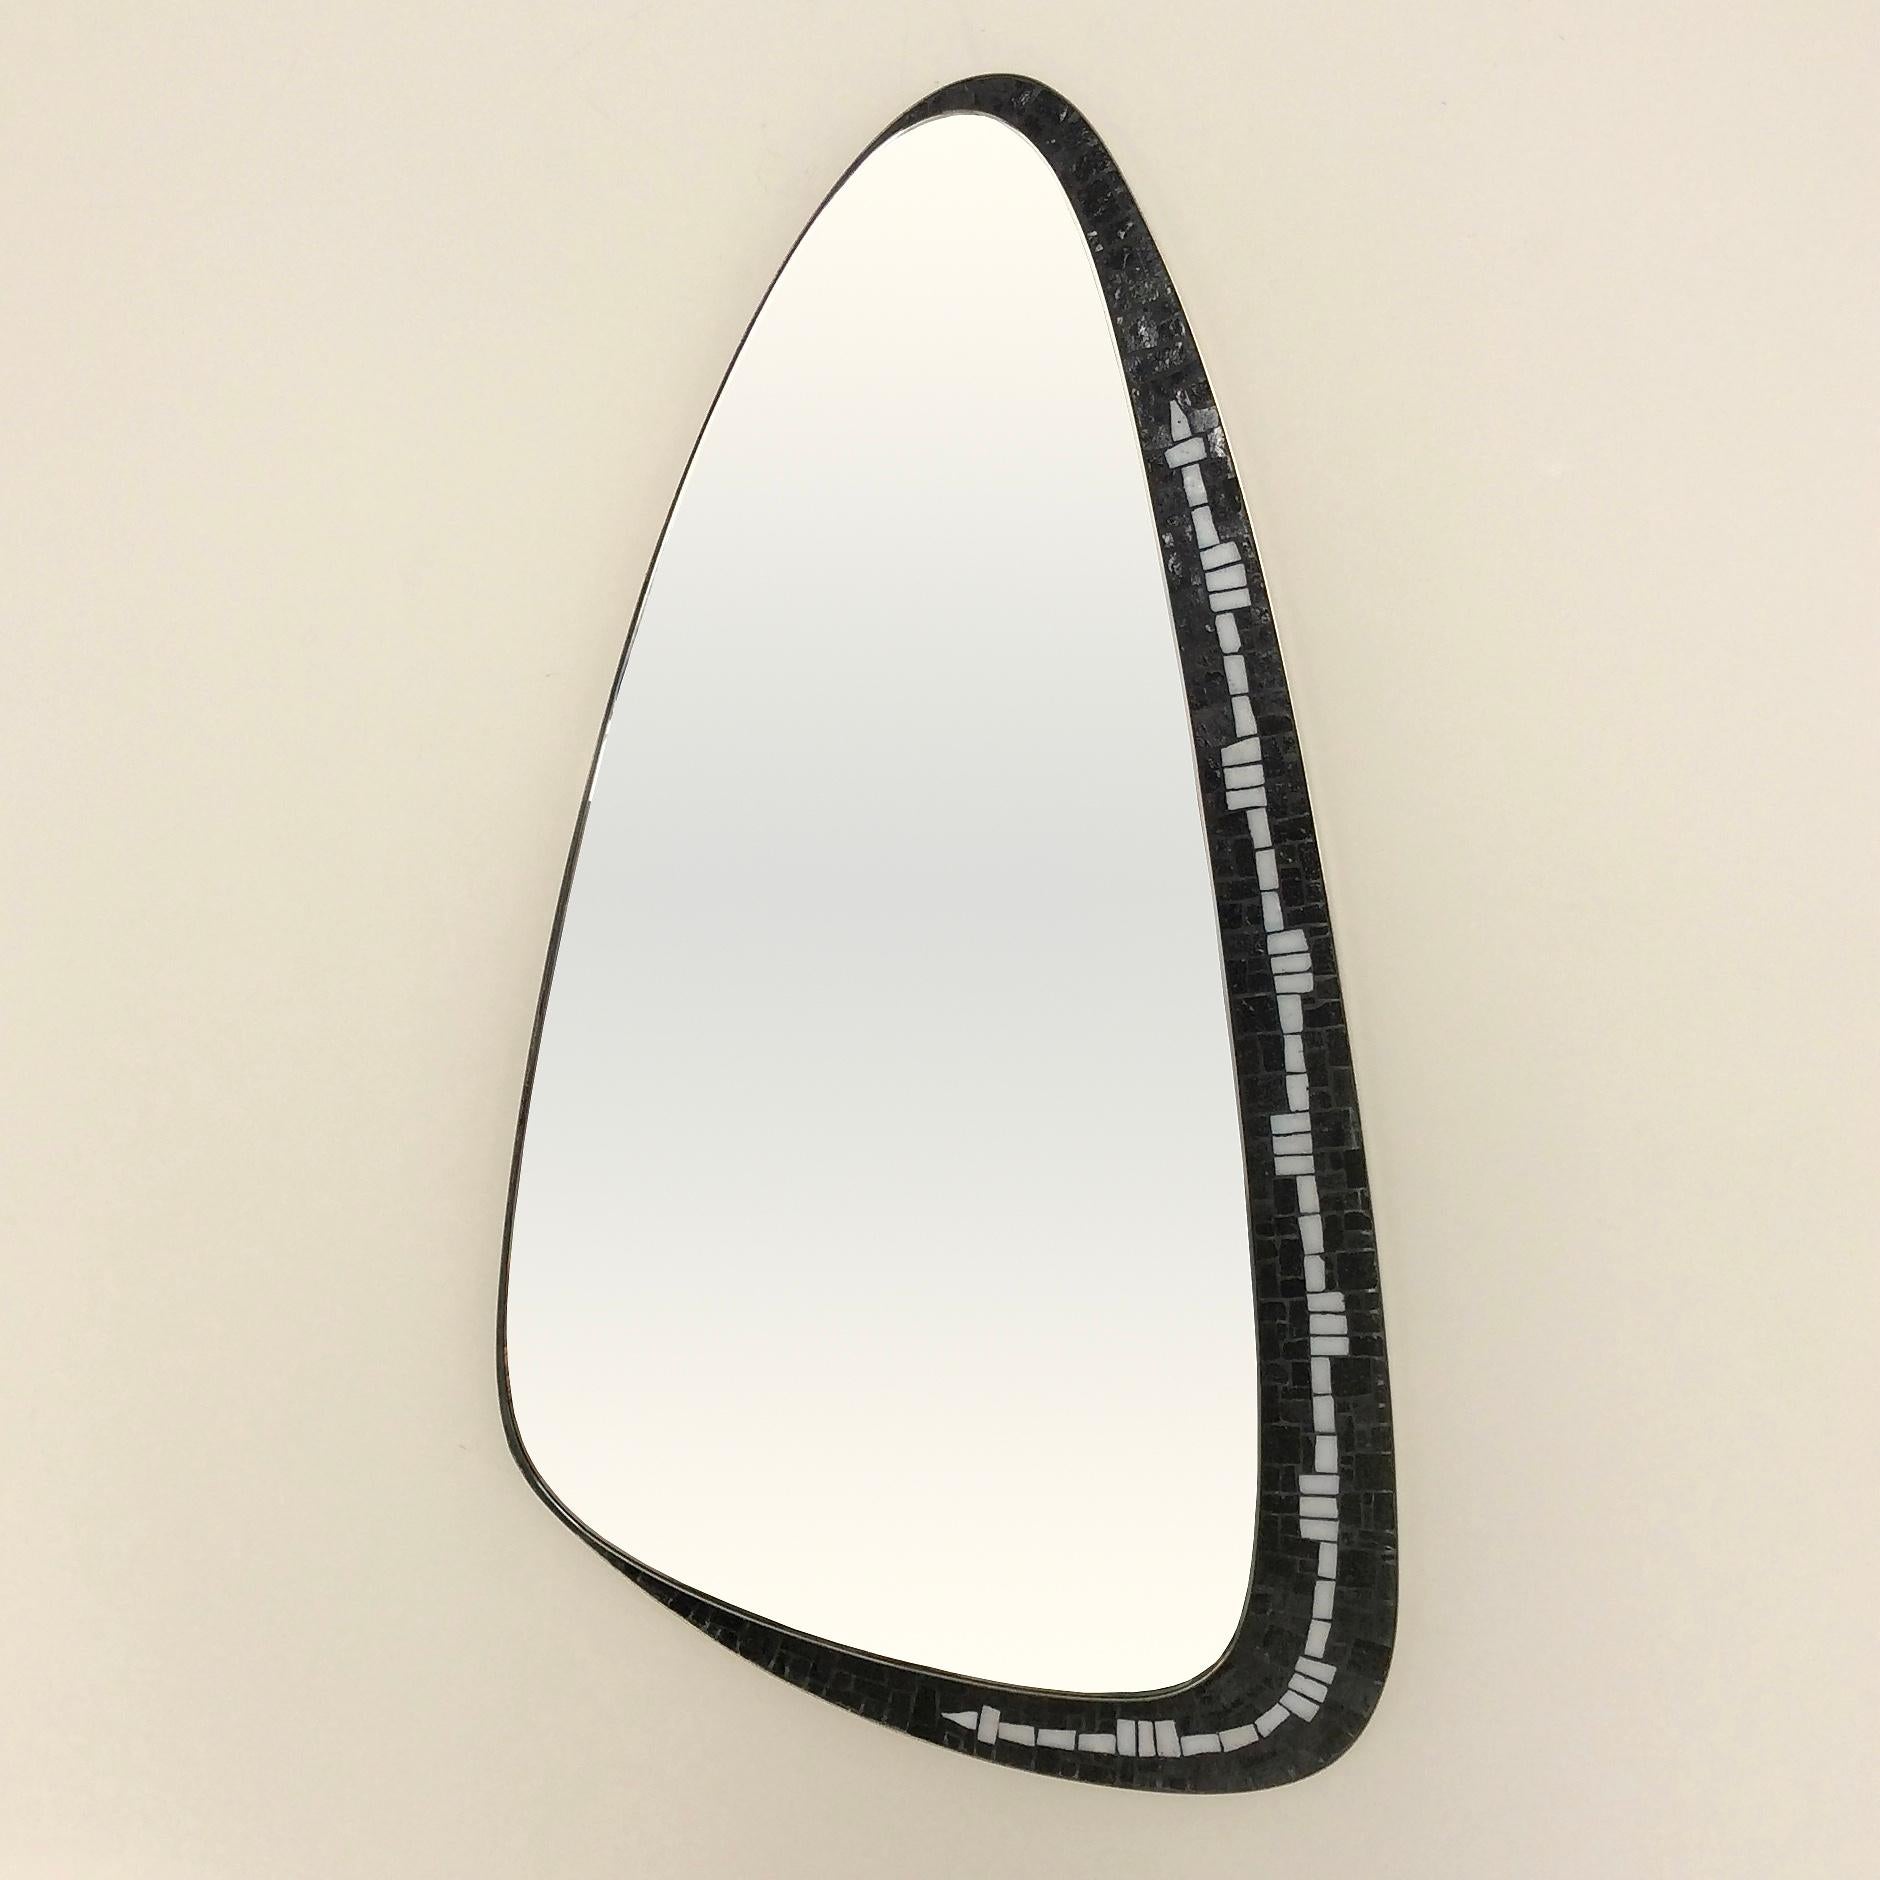 Rare Berthold Müller asymetrical wall mirror, circa 1950, Germany.
Brass frame, black and white glass mosaïc.
Dimensions: 89 cm H, 48 cm W, 2 cm D.
Original good condition.
All purchases are covered by our Buyer Protection Guarantee.
This item can